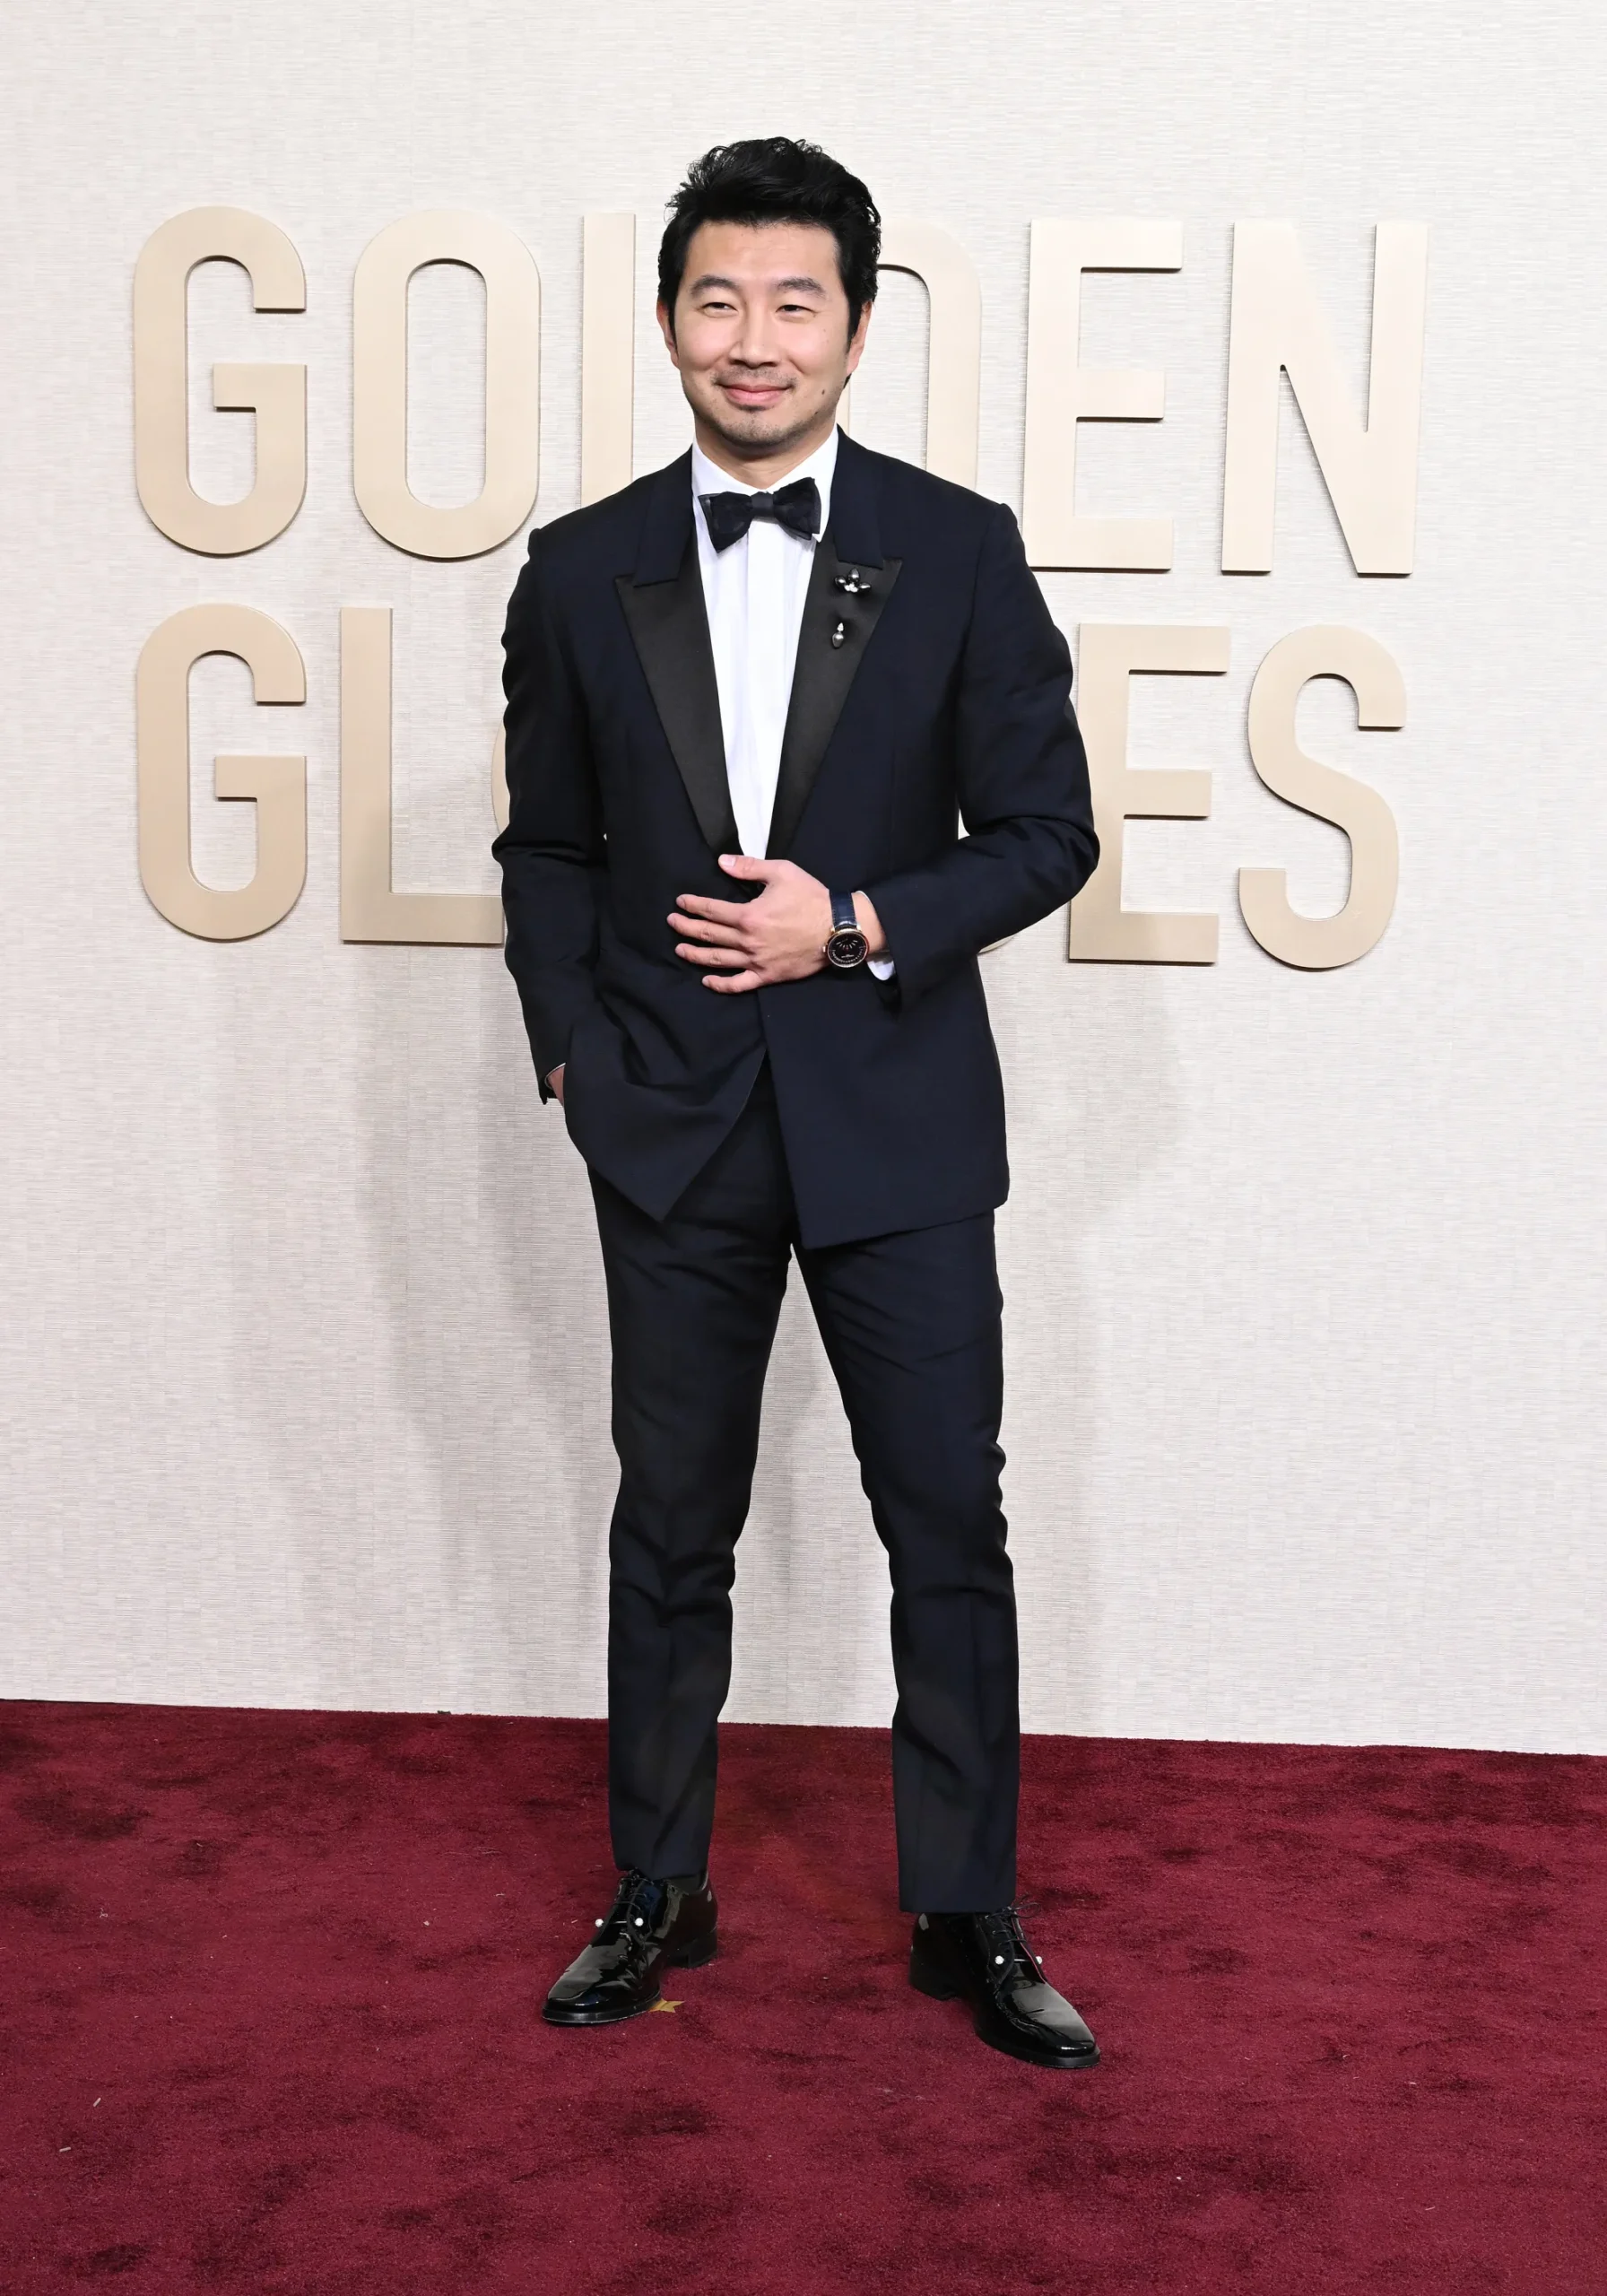 Simu Liu did not disappoint with his Golden Globes look from Givenchy